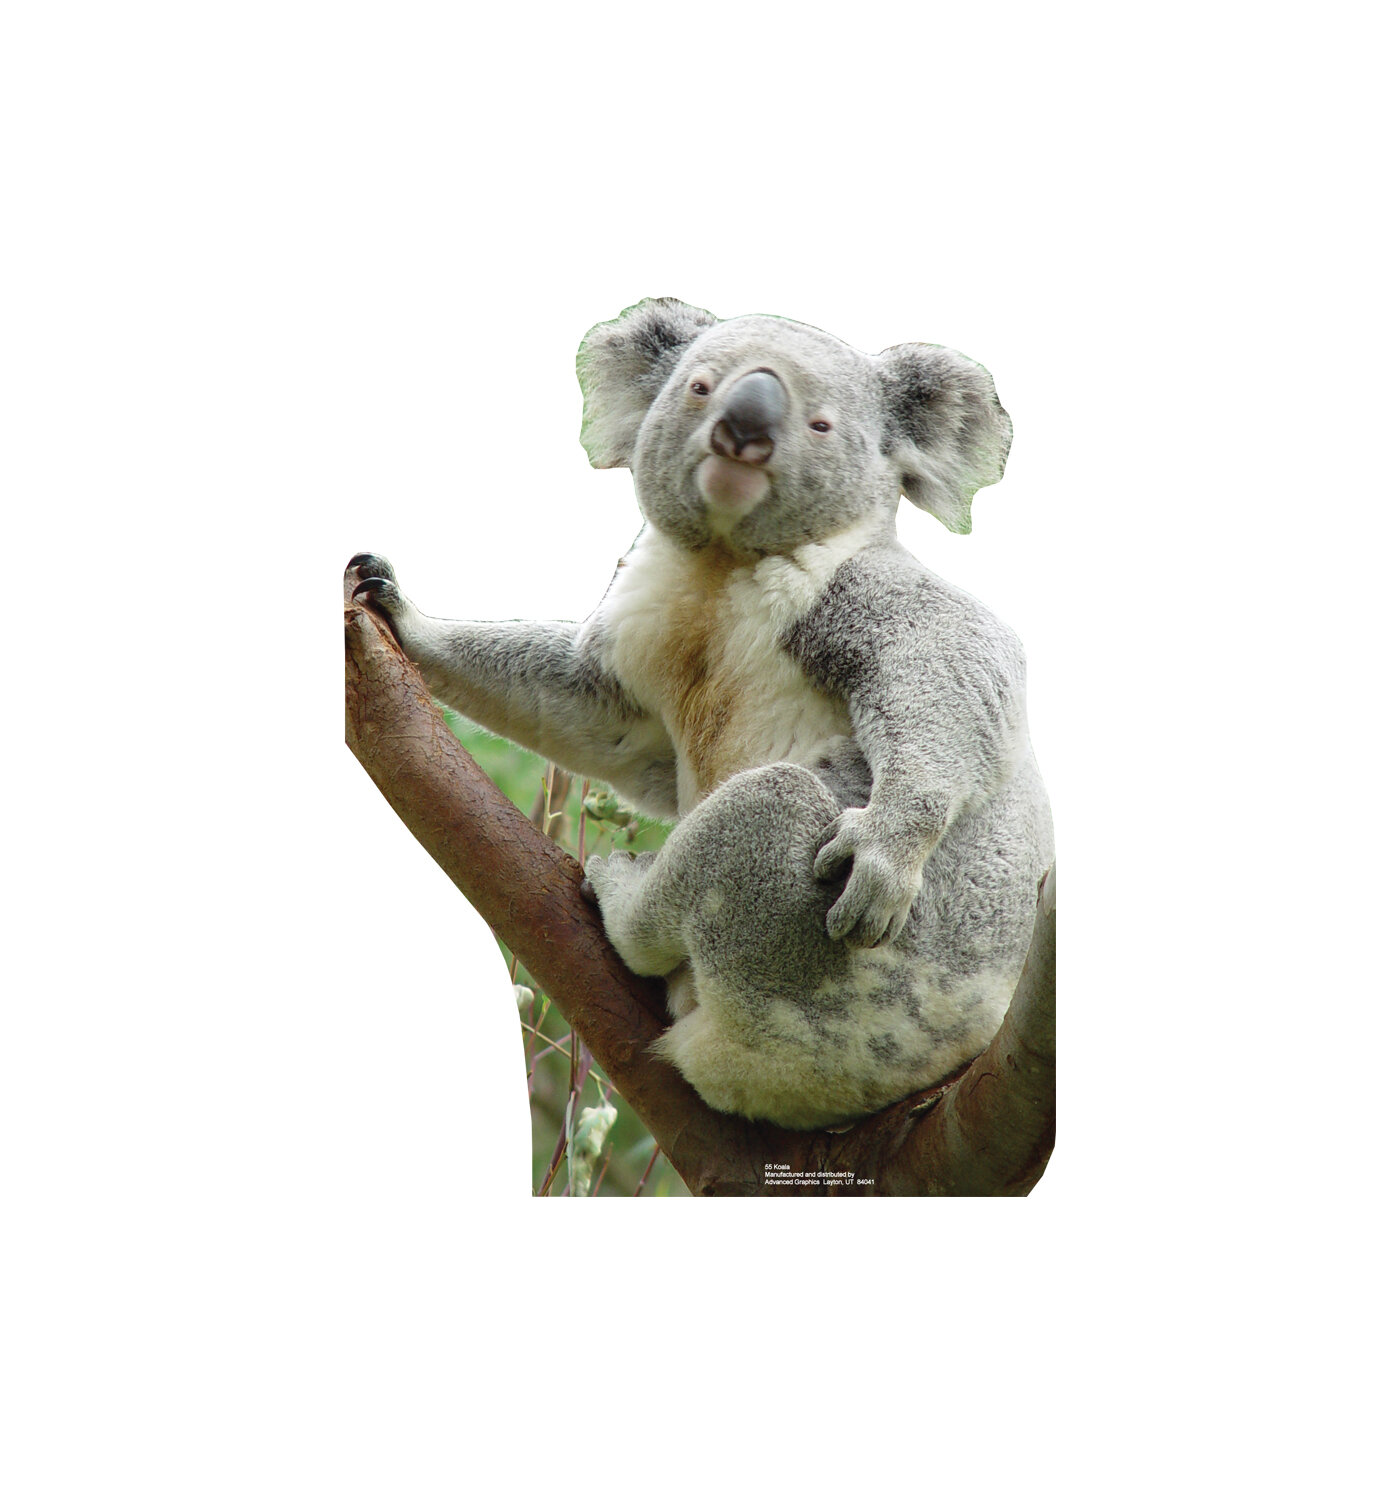 3D LiveLife Coin Purse - Koala Cuddle from Deluxebase. Lenticular 3D Koala  Bear Purse. Cash, Coin and Card Holder with Secure Zip Featuring Artwork